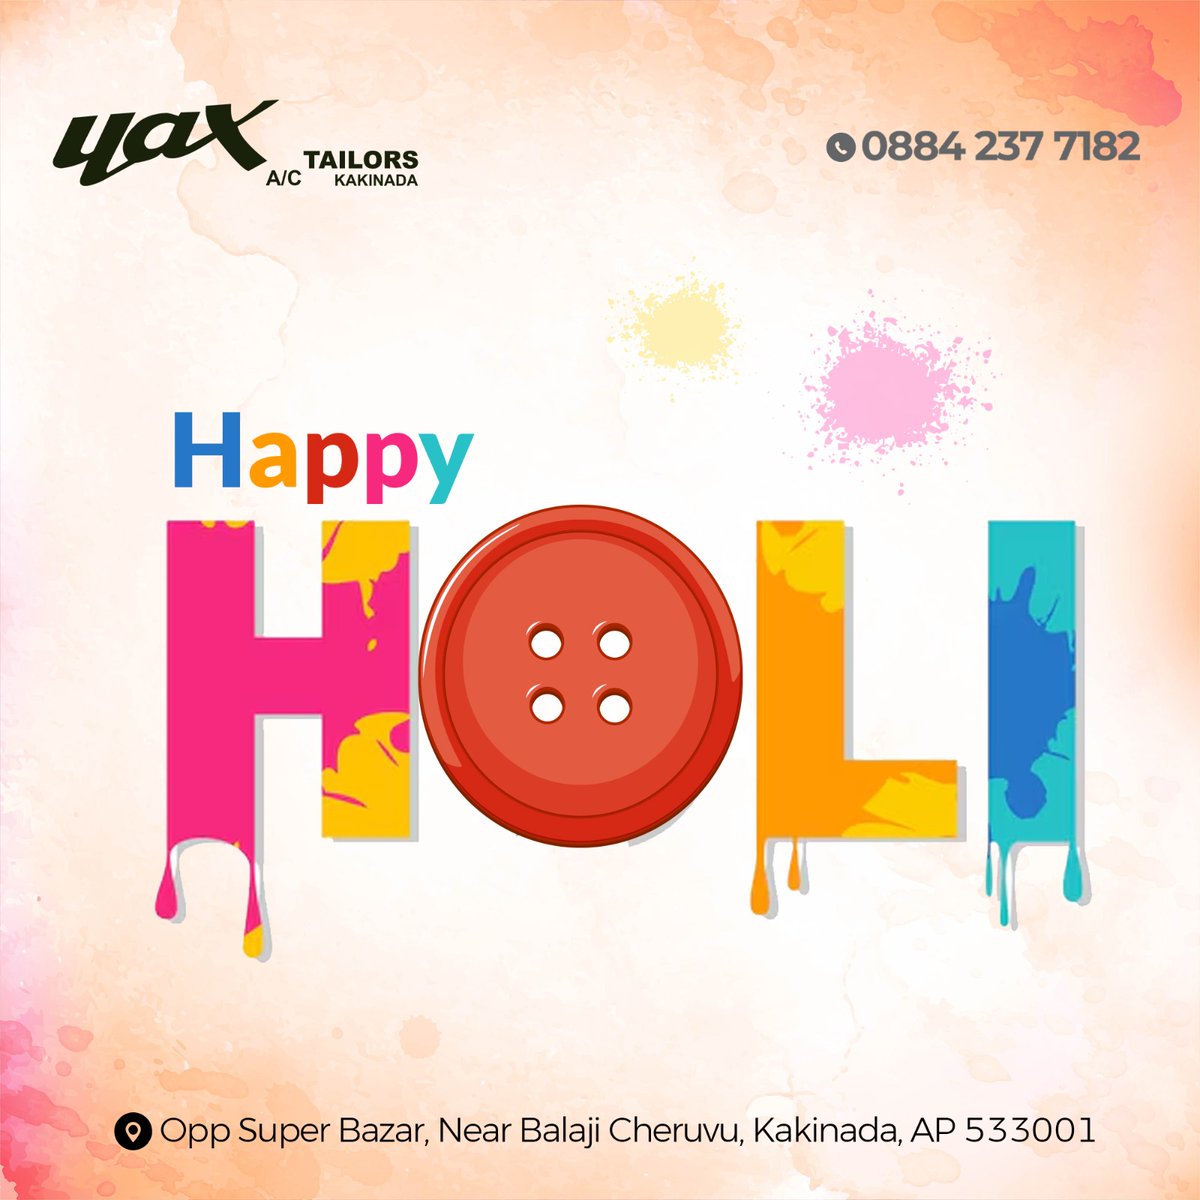 'Let's fill our hearts with colors of love and happiness and make this Holi a memorable one.'
.
.
#Happyholi #March25 #colours #festivalofcolours
#tailoringexpert #clothingalterations #Qualitytailoring #mensstyle #sherwanis #mensclothes #onlyformen #Kakinada #India #YAXtailor